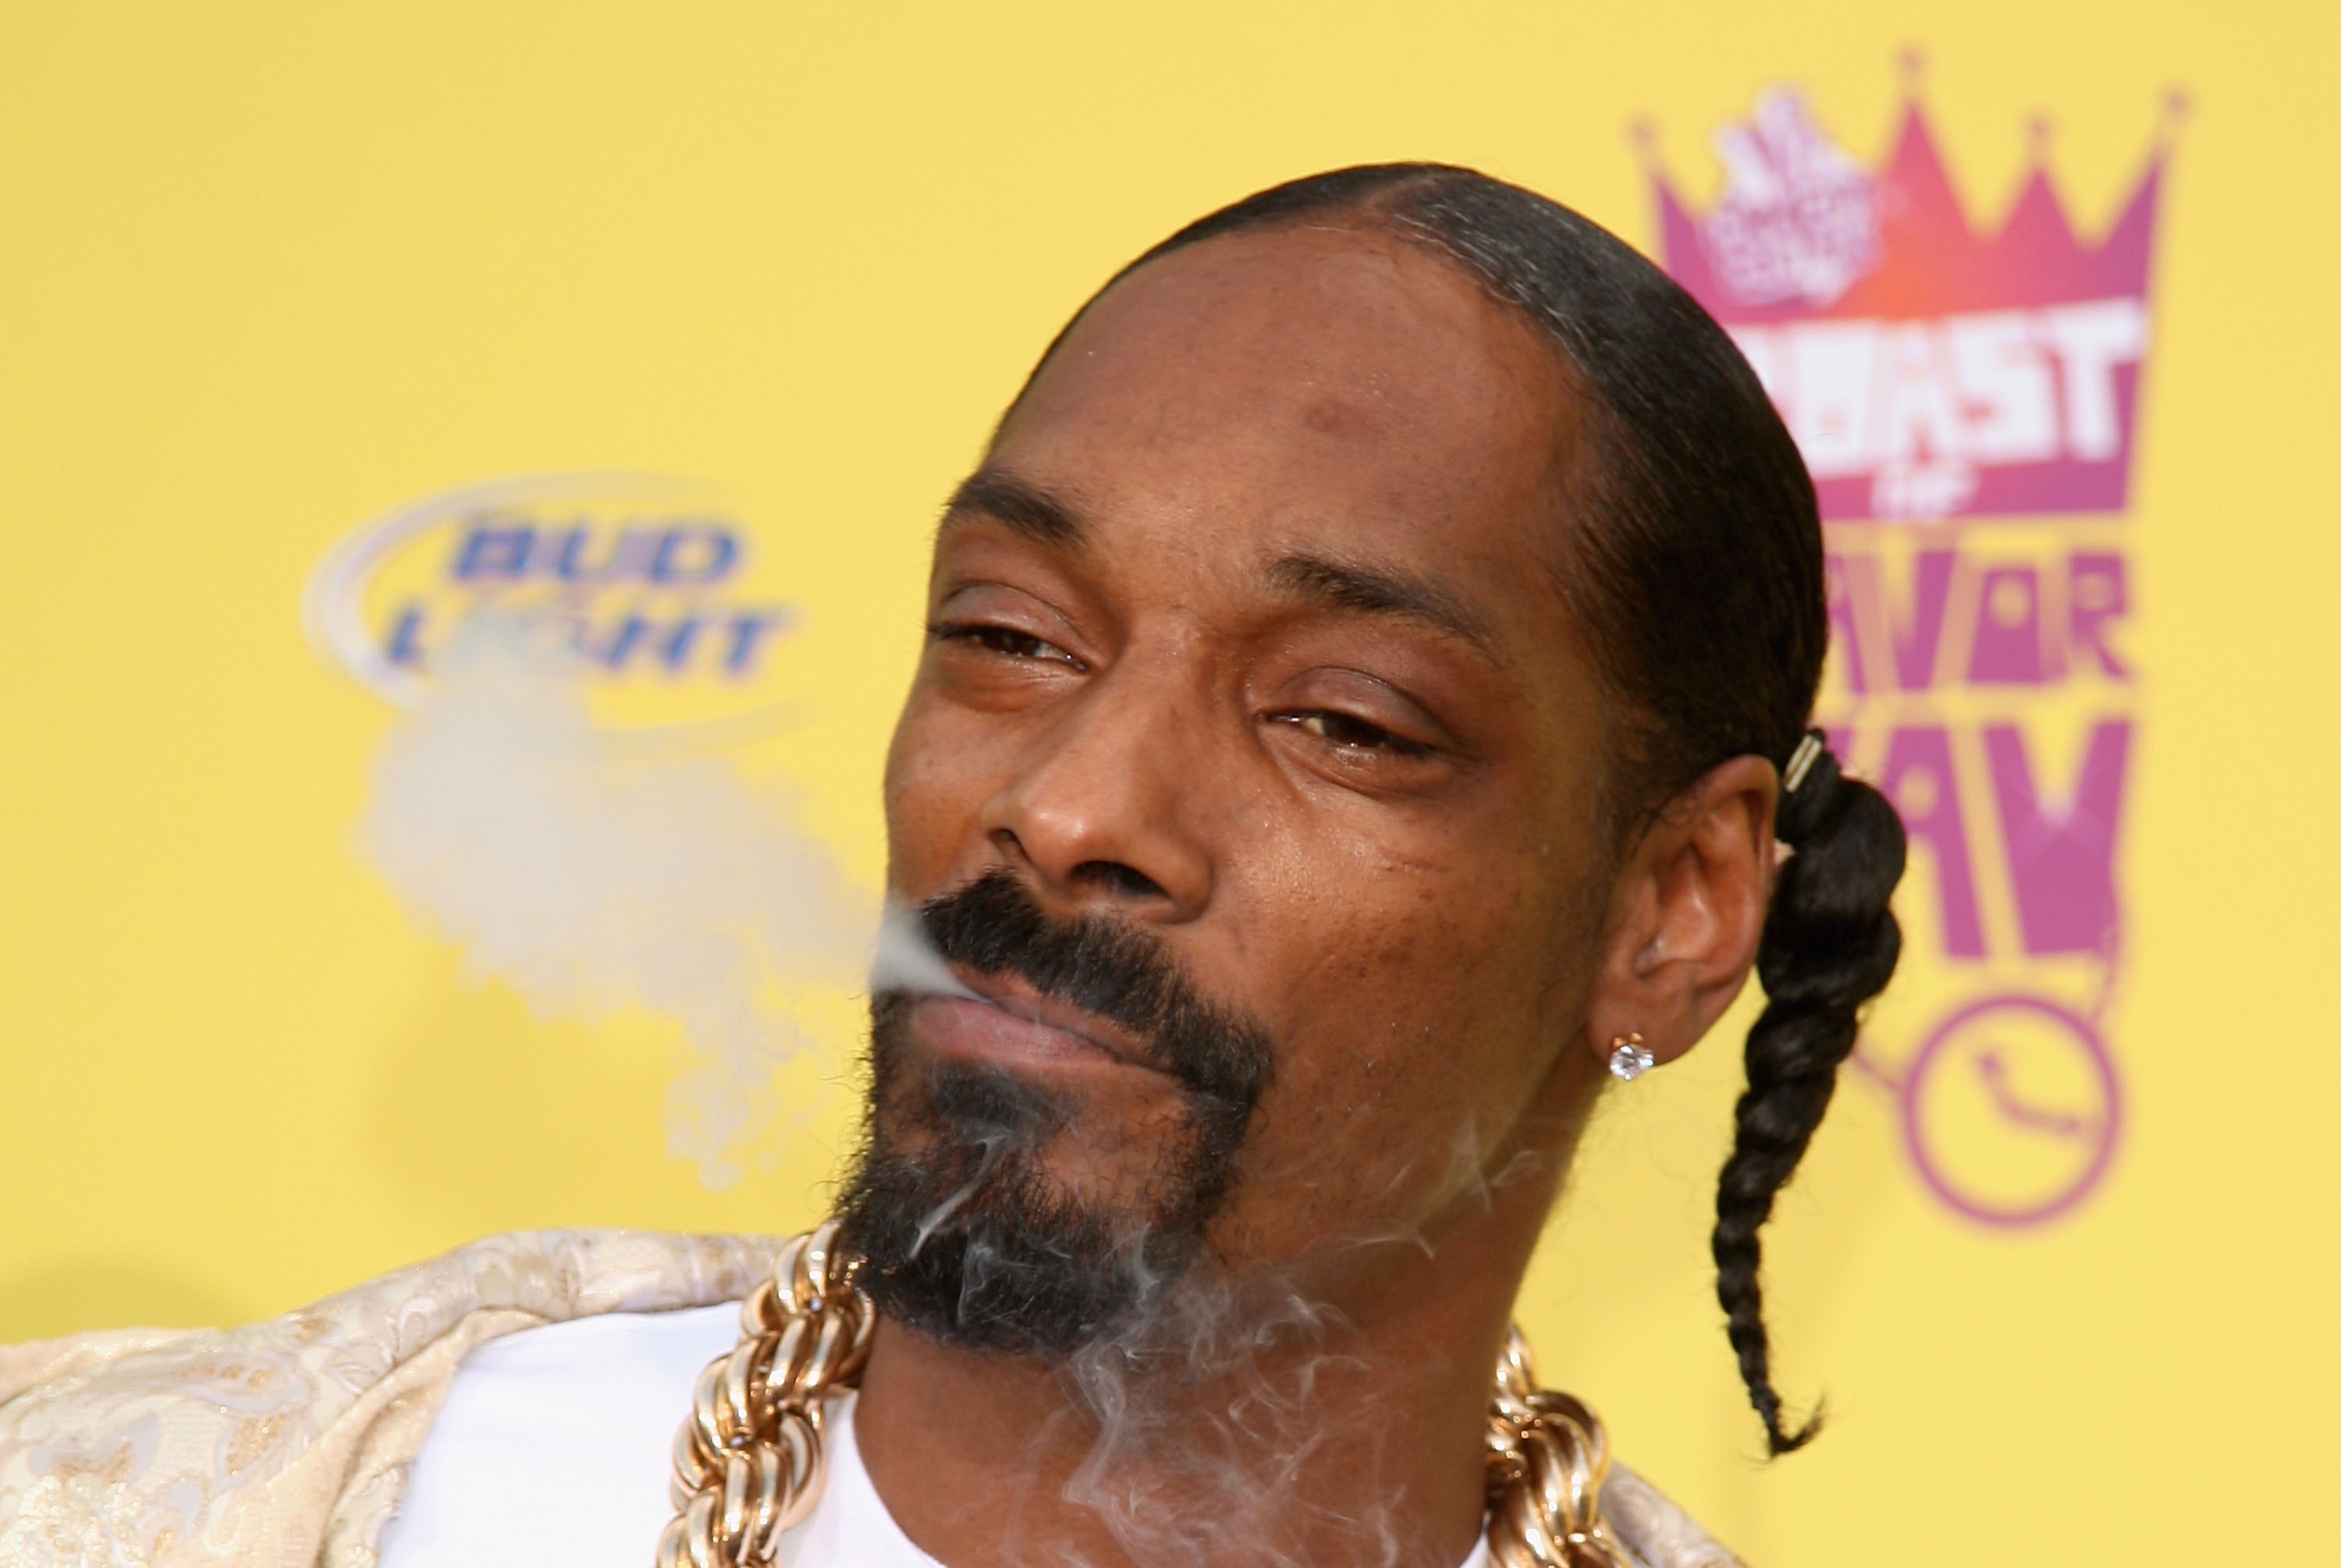 Snoop Dogg: I smoked weed at the White House